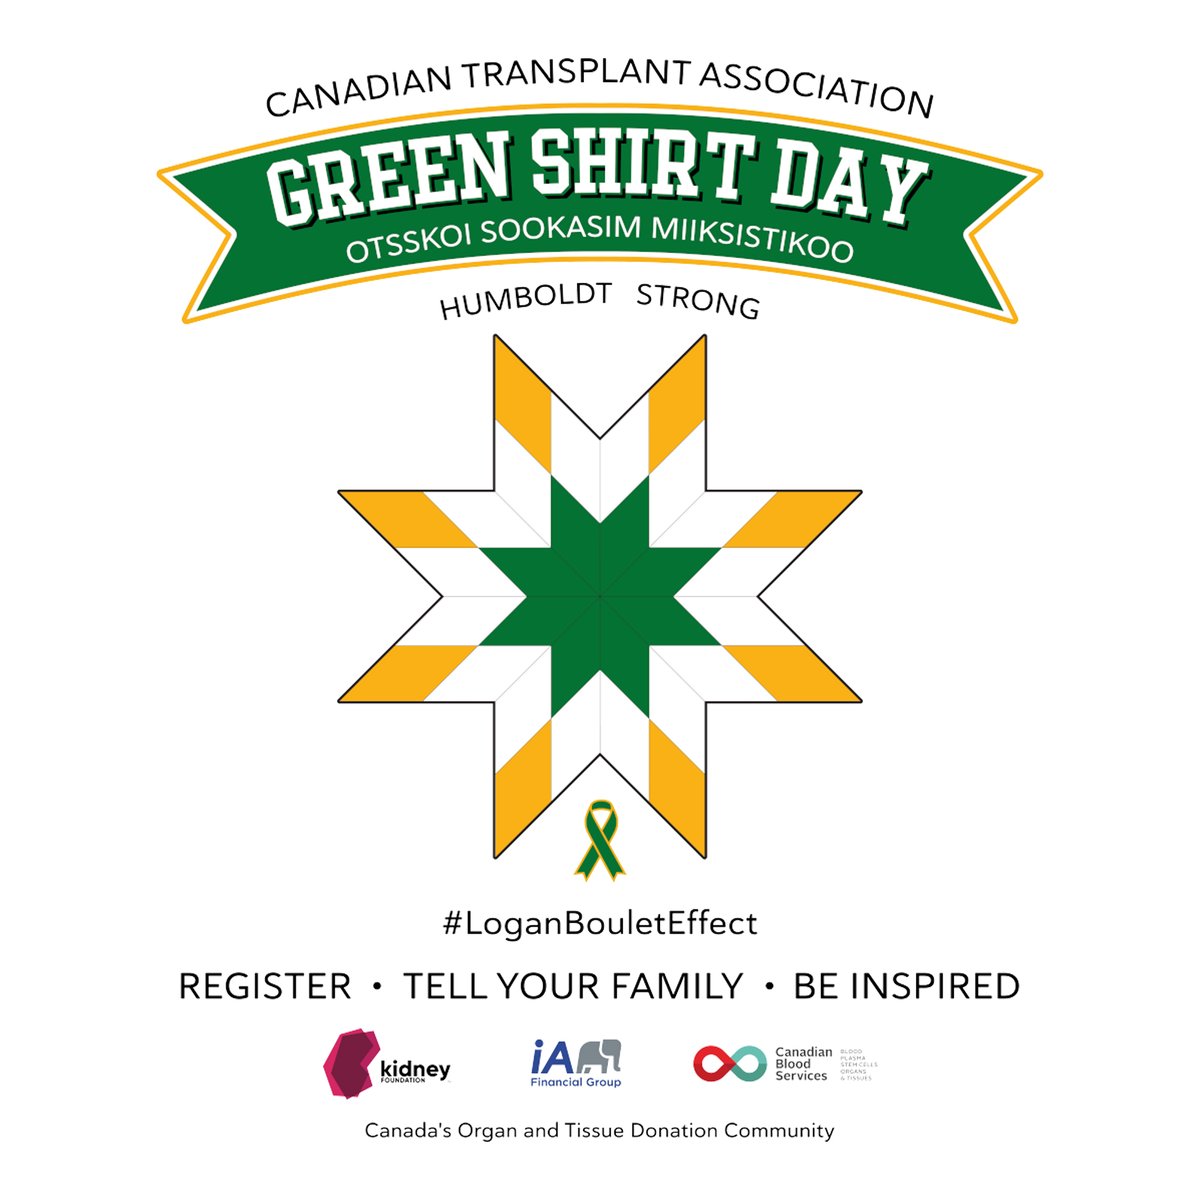 🟢 It's #GreenShirtDay! Almost 90% of Canadians support organ donation, yet only 32% are registered donors. For many living with #PH, lung transplantation offers hope when medical therapy is no longer enough. Register your consent today at ow.ly/hu6Z50R8Qqn